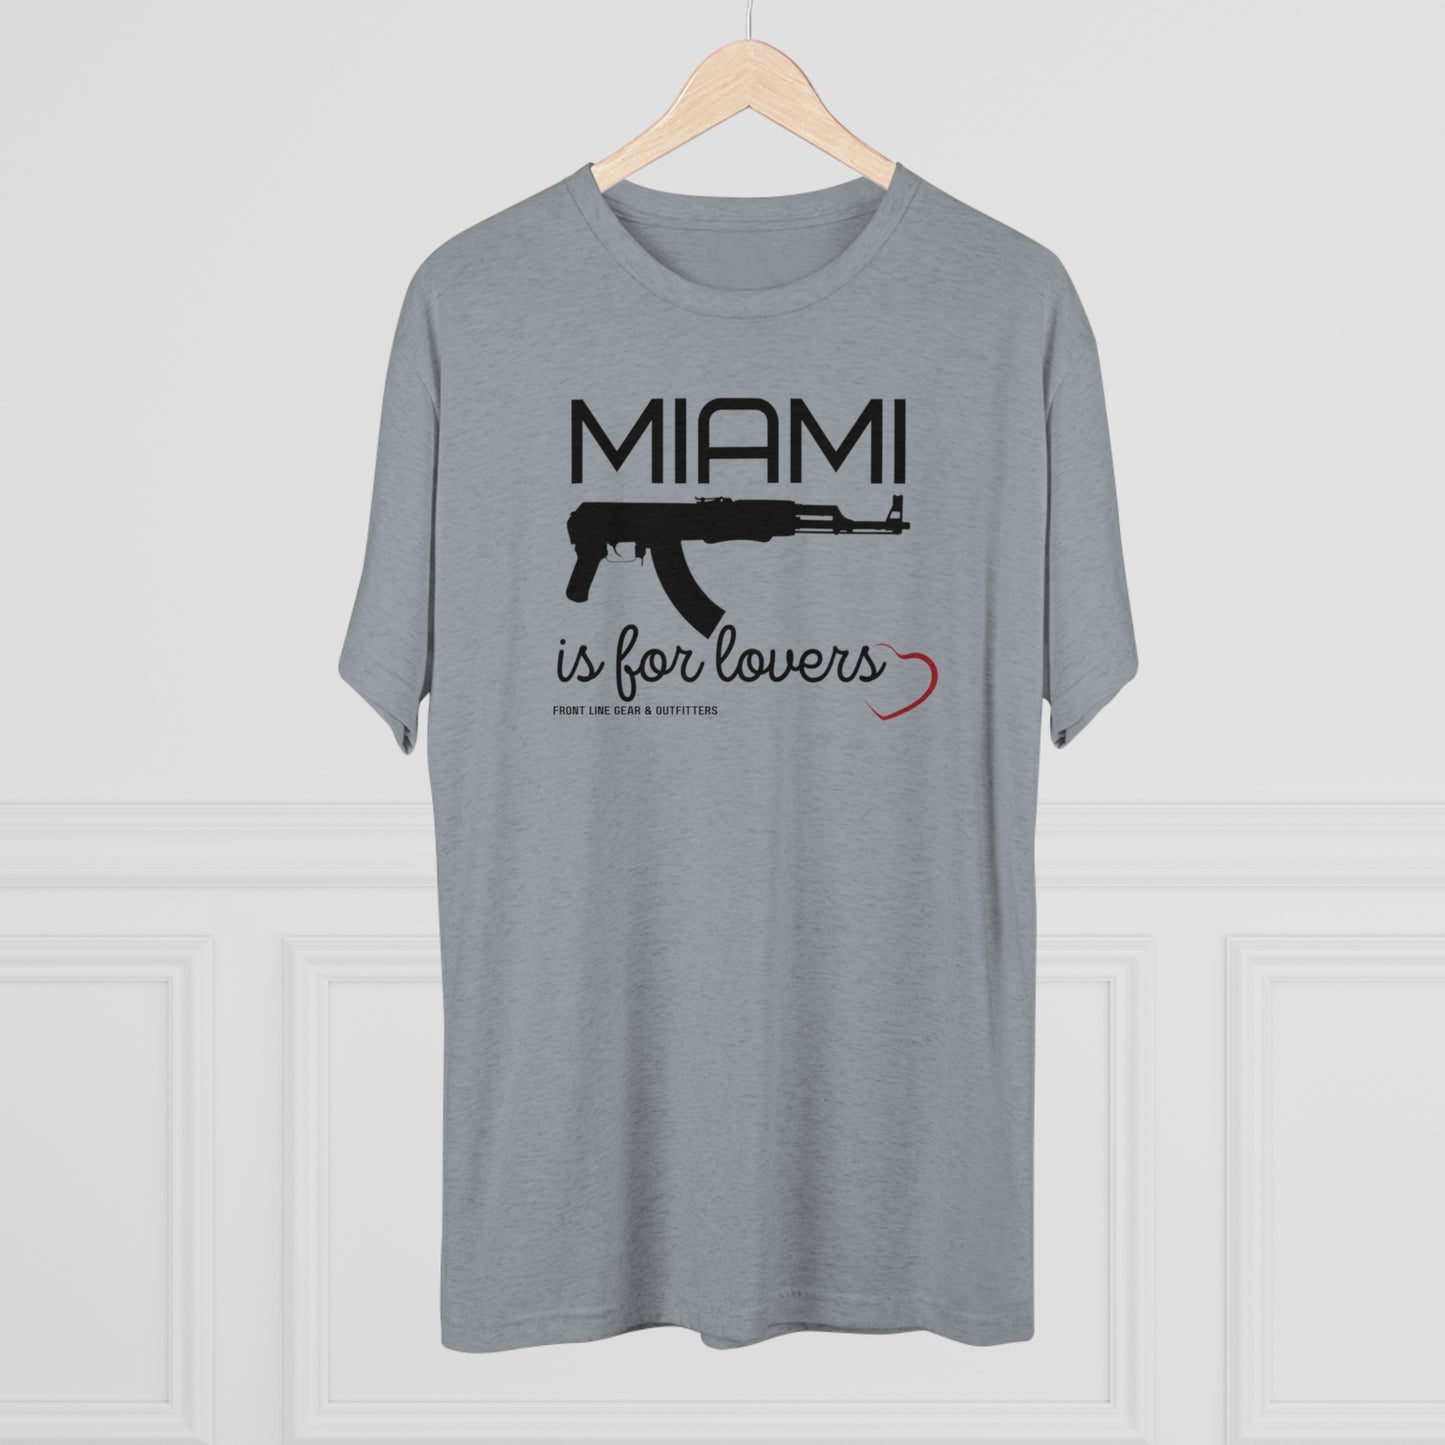 Miami is for Lovers tee